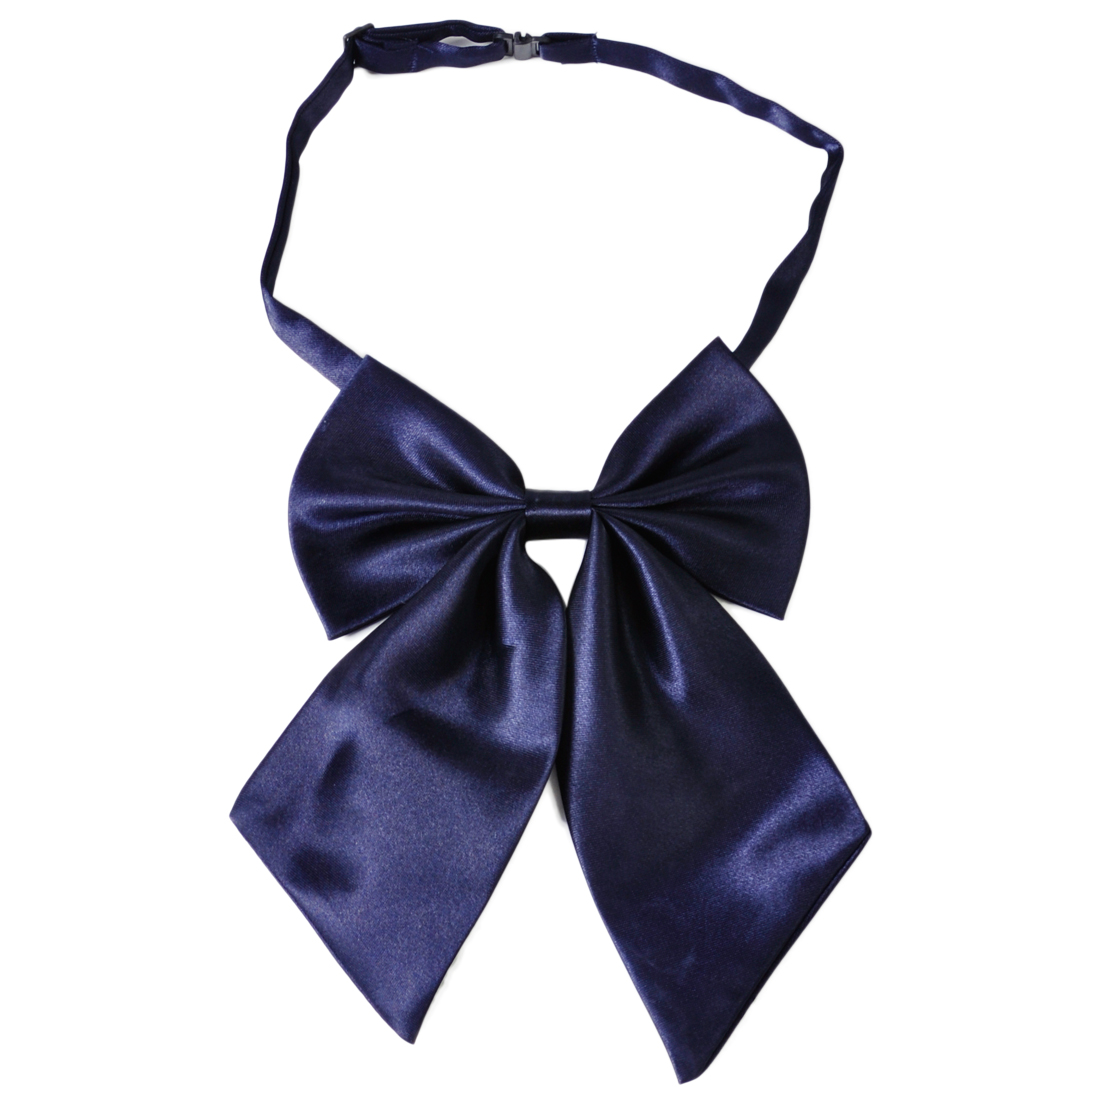 Women Girl Lady Bow Tie Neckwear Party Banquet Solid Color Adjustable ...